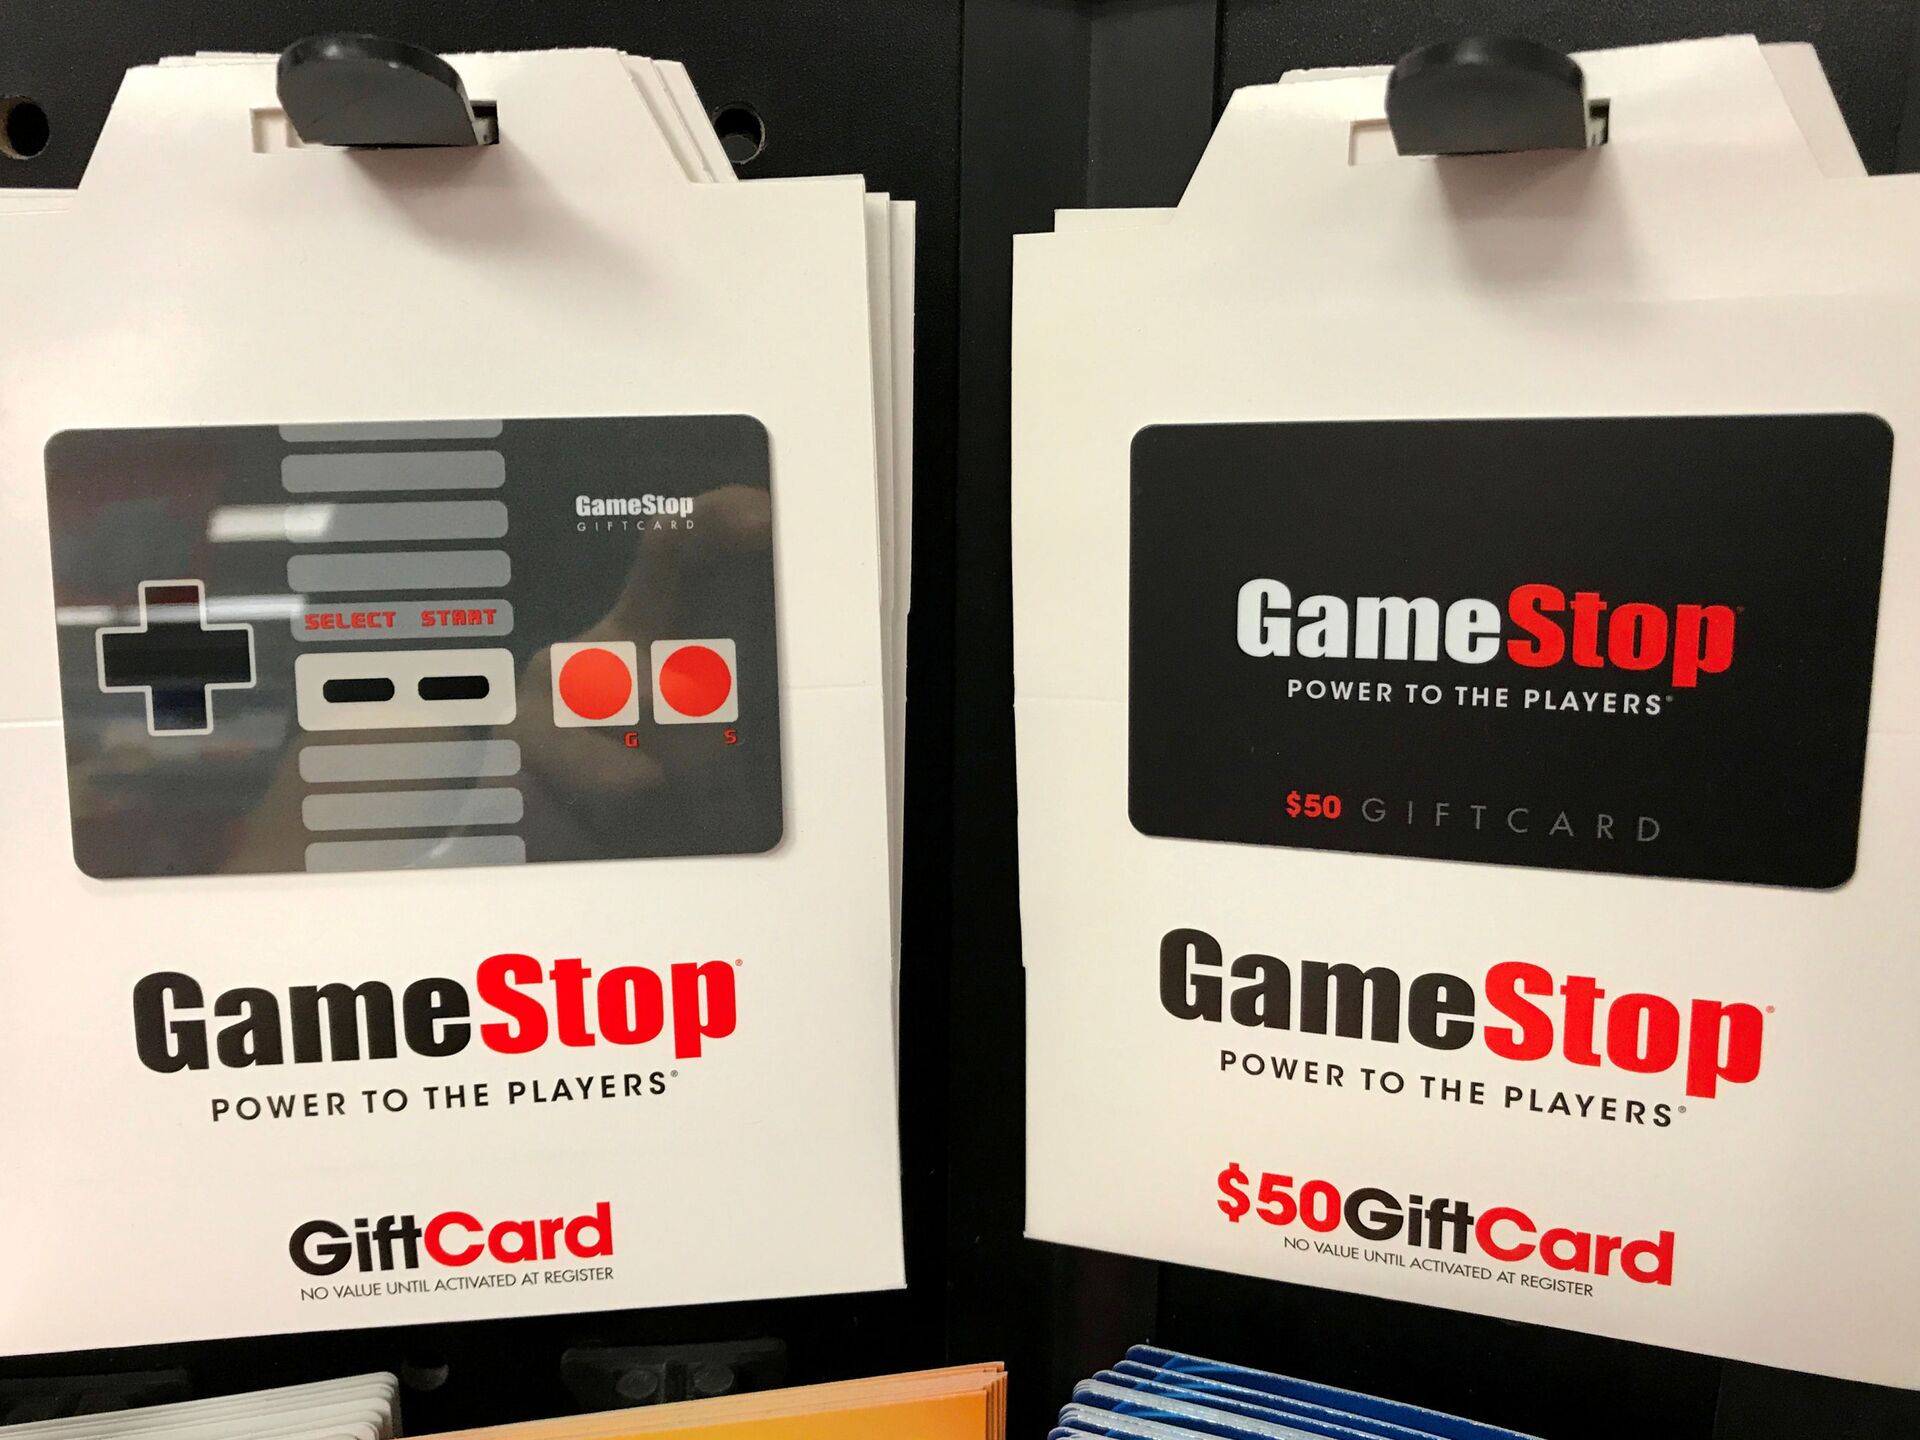 GameStop's Fiendish 'Short Squeeze' Unlikely to Ignite Market-Wide Contagion, Says Barclays - Sputnik International, 1920, 02.02.2021